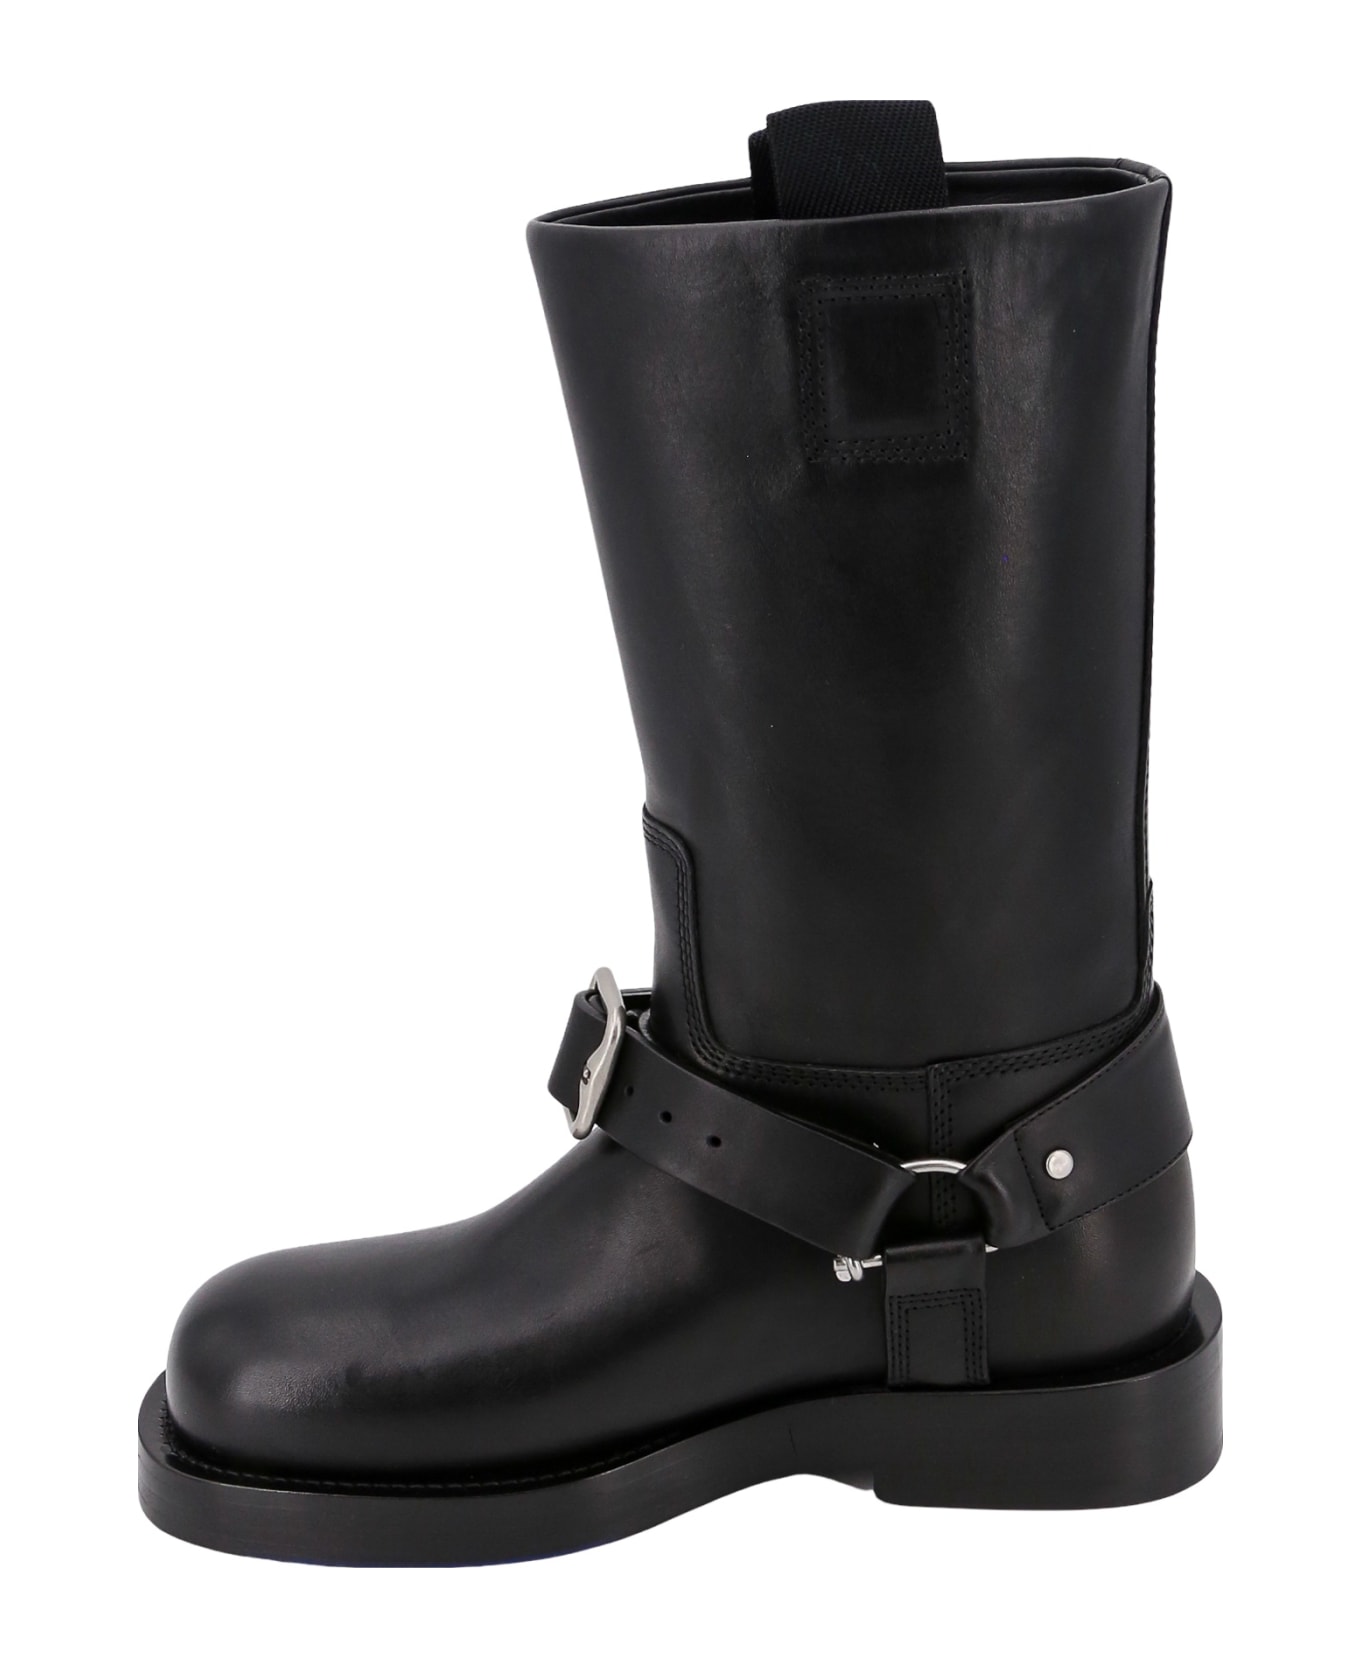 Burberry Buckle Detailed Boots - Black ブーツ